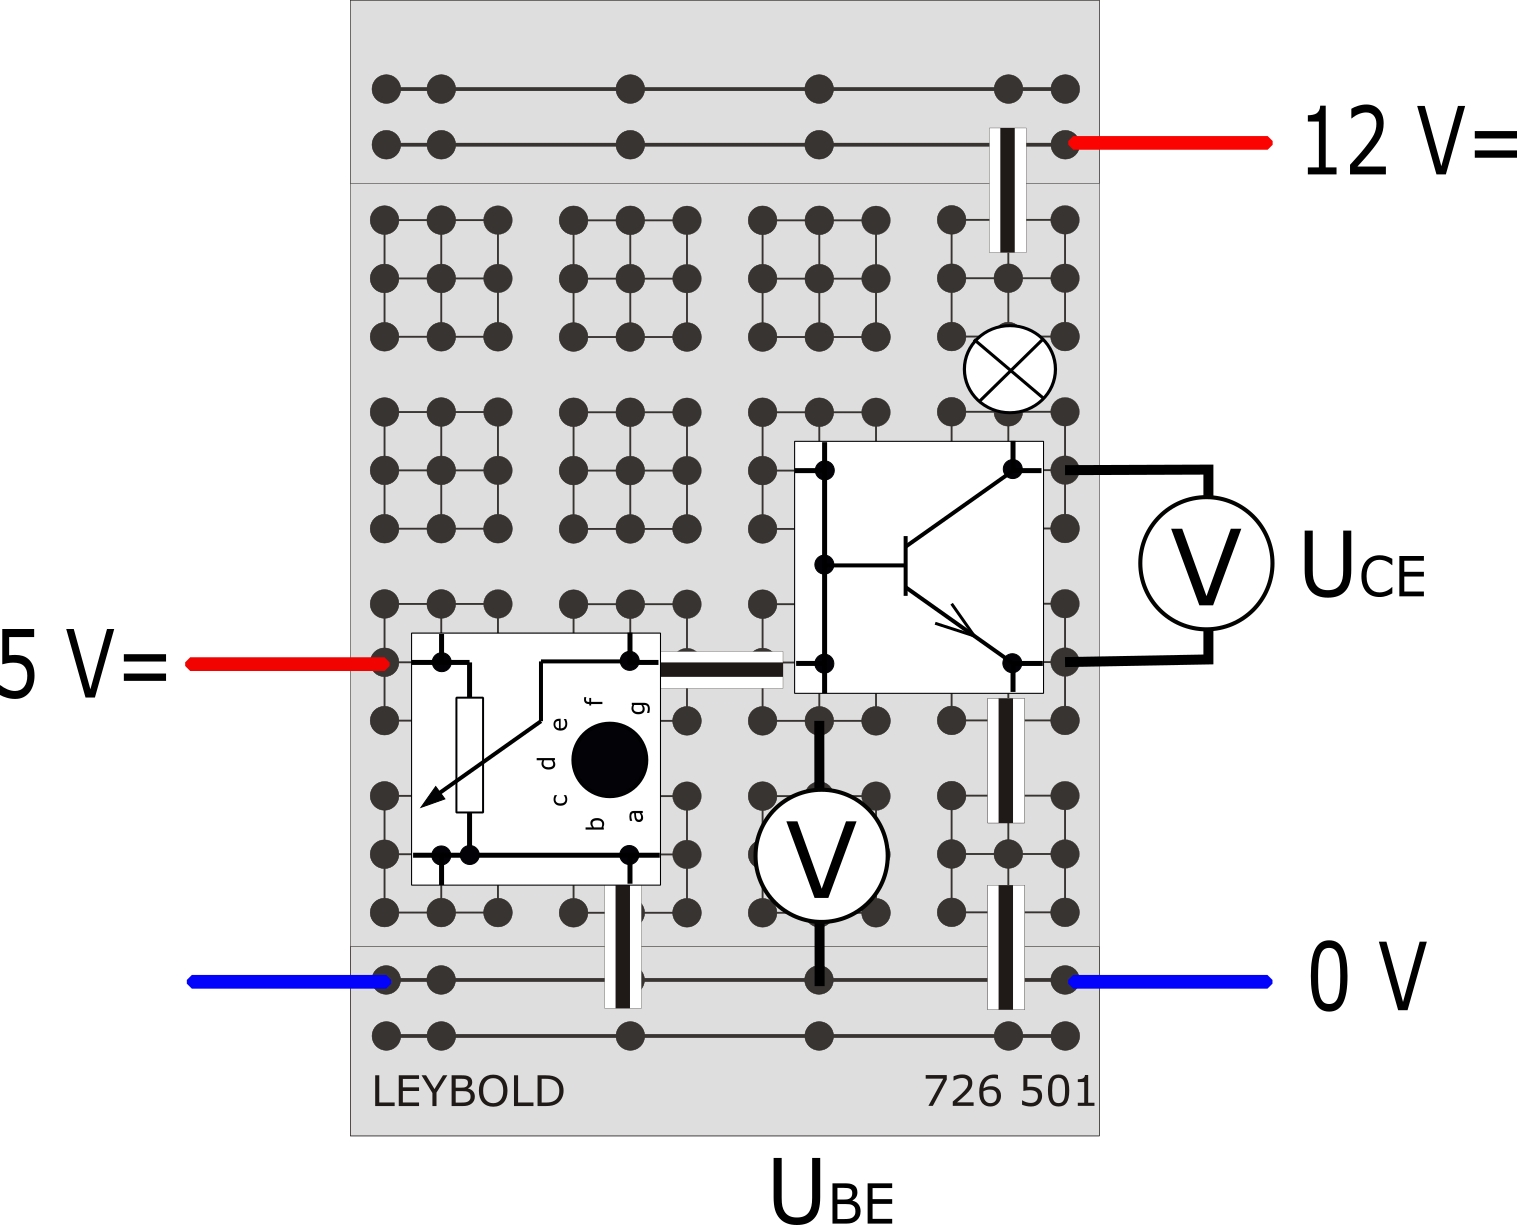 Transistor as a controllable electrical component